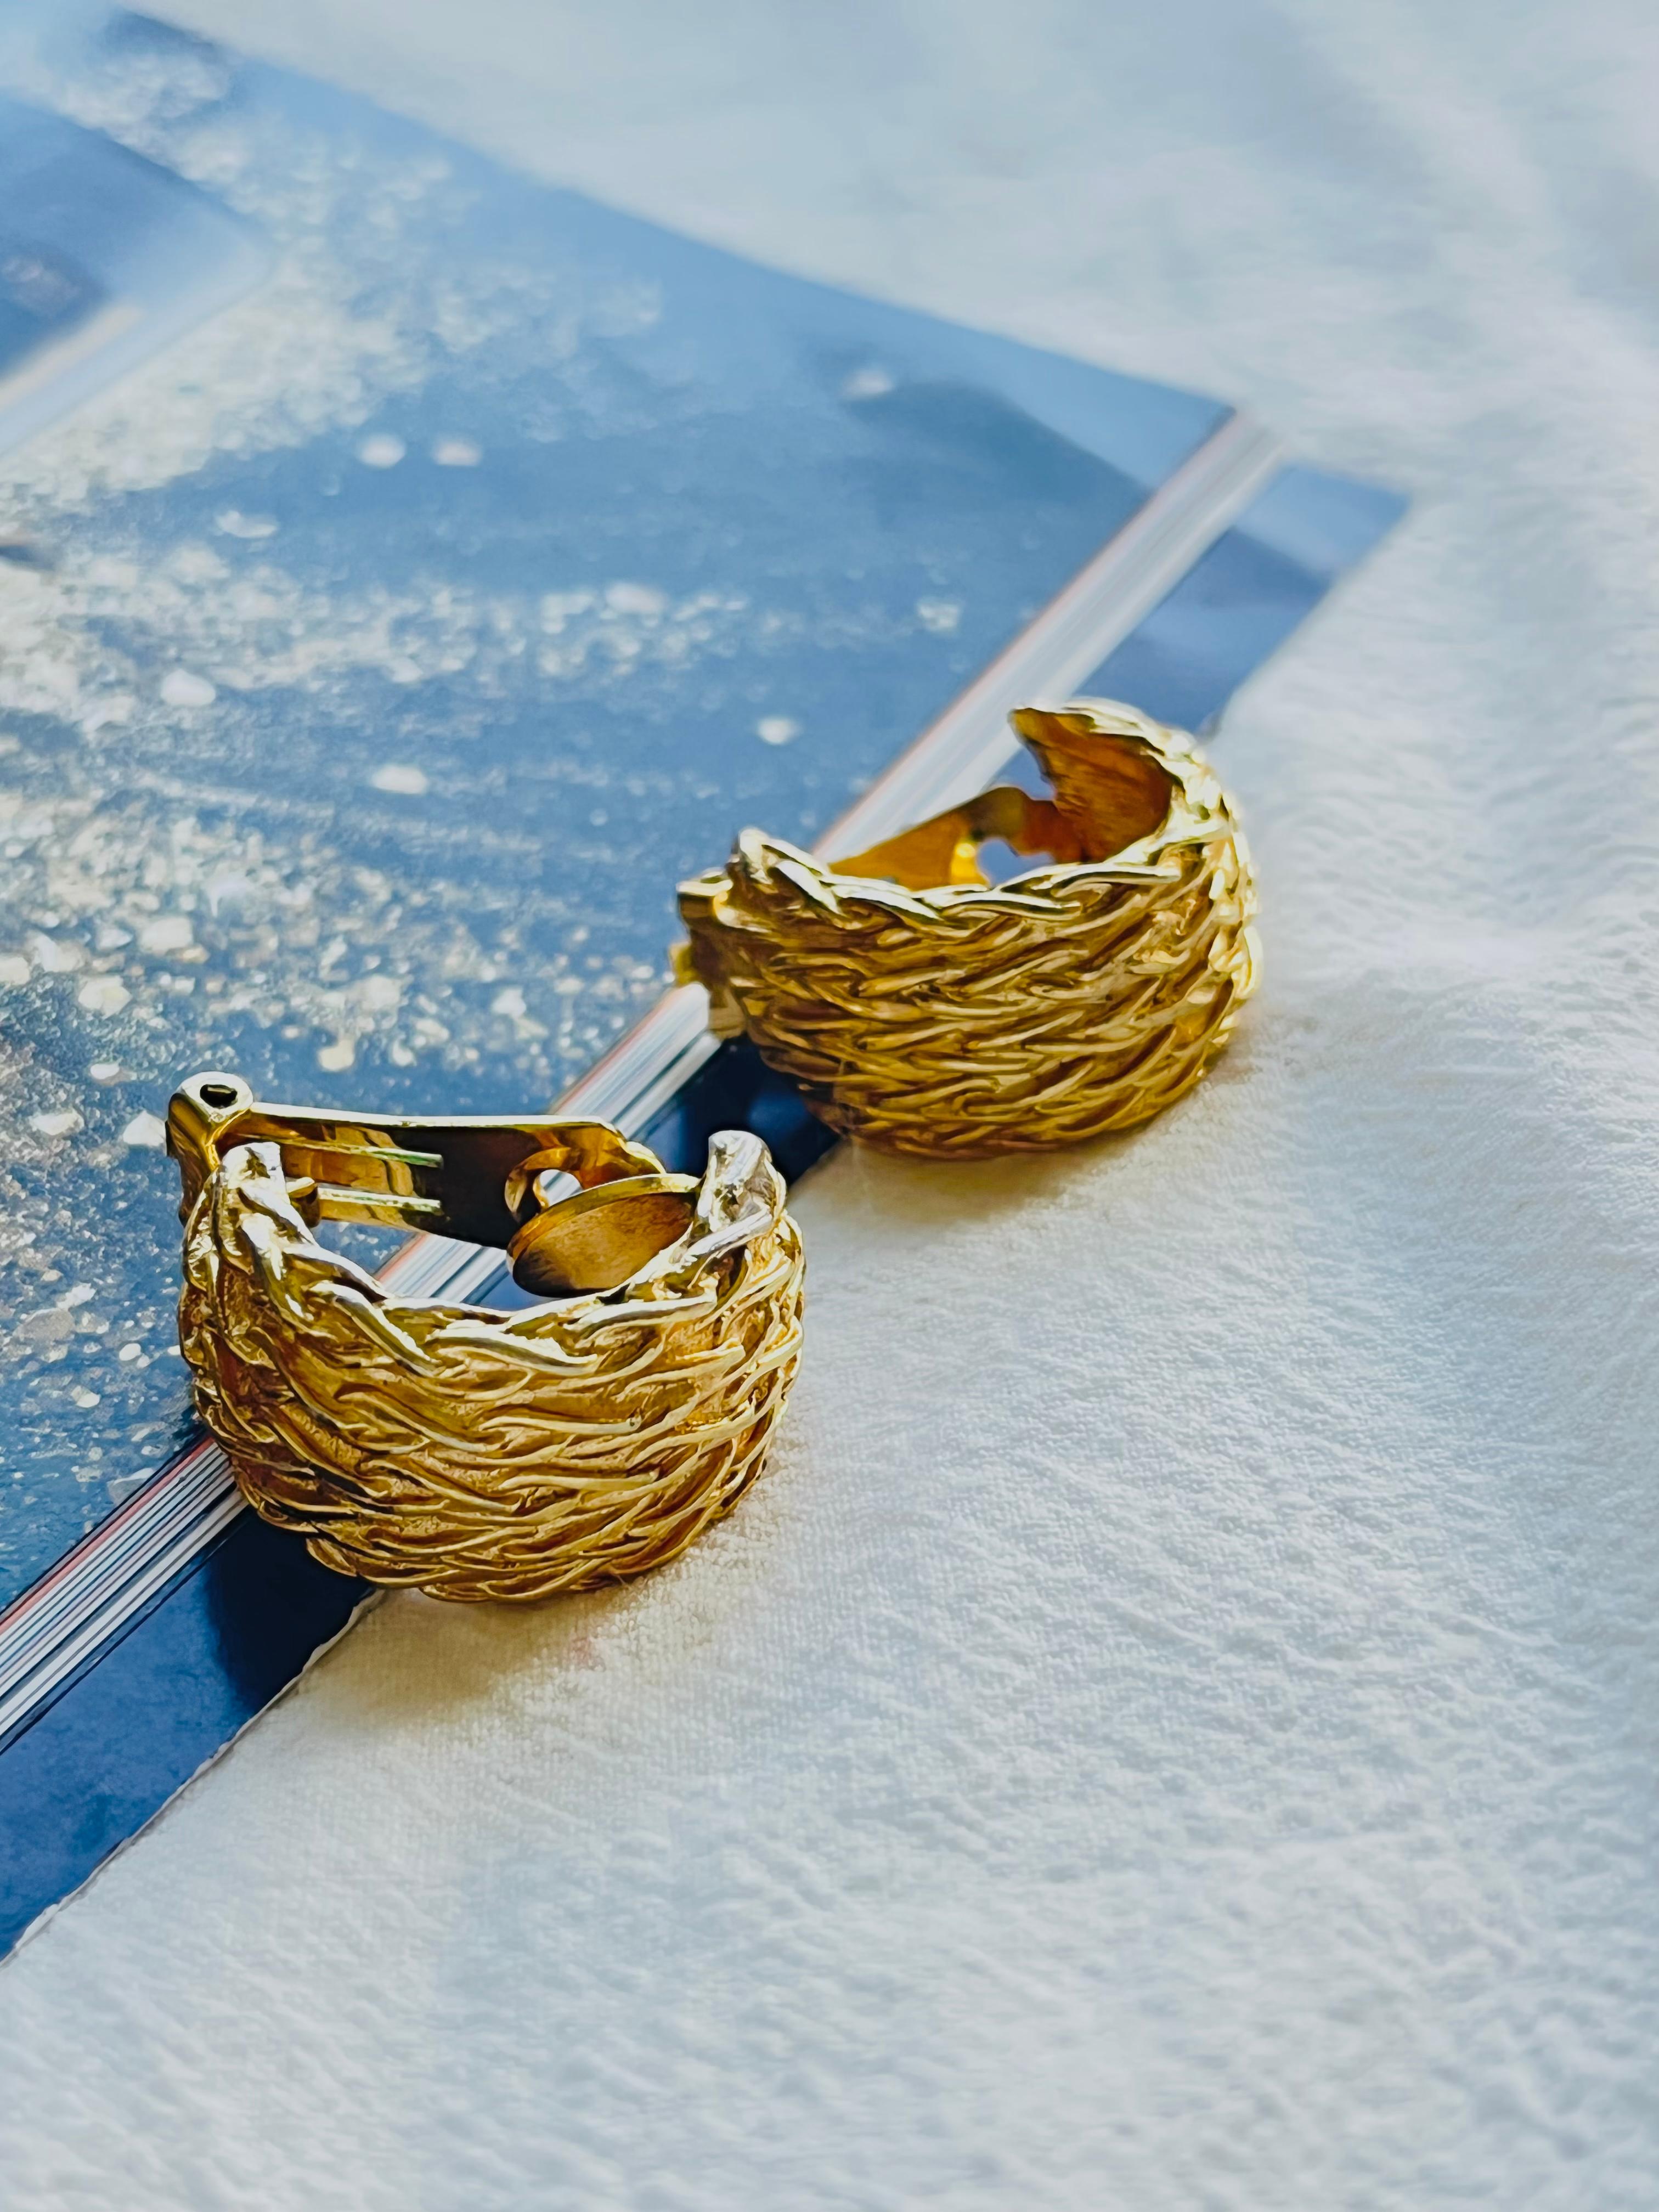 Christian Dior Vintage 1980s Large Half Hoop Twist Rope Chunky Clip Earrings, Gold Tone

Very good condition. Some light scratches or colour loss, barely noticeable. One earring back has been cut off, but still good to wear. 

A very beautiful pair